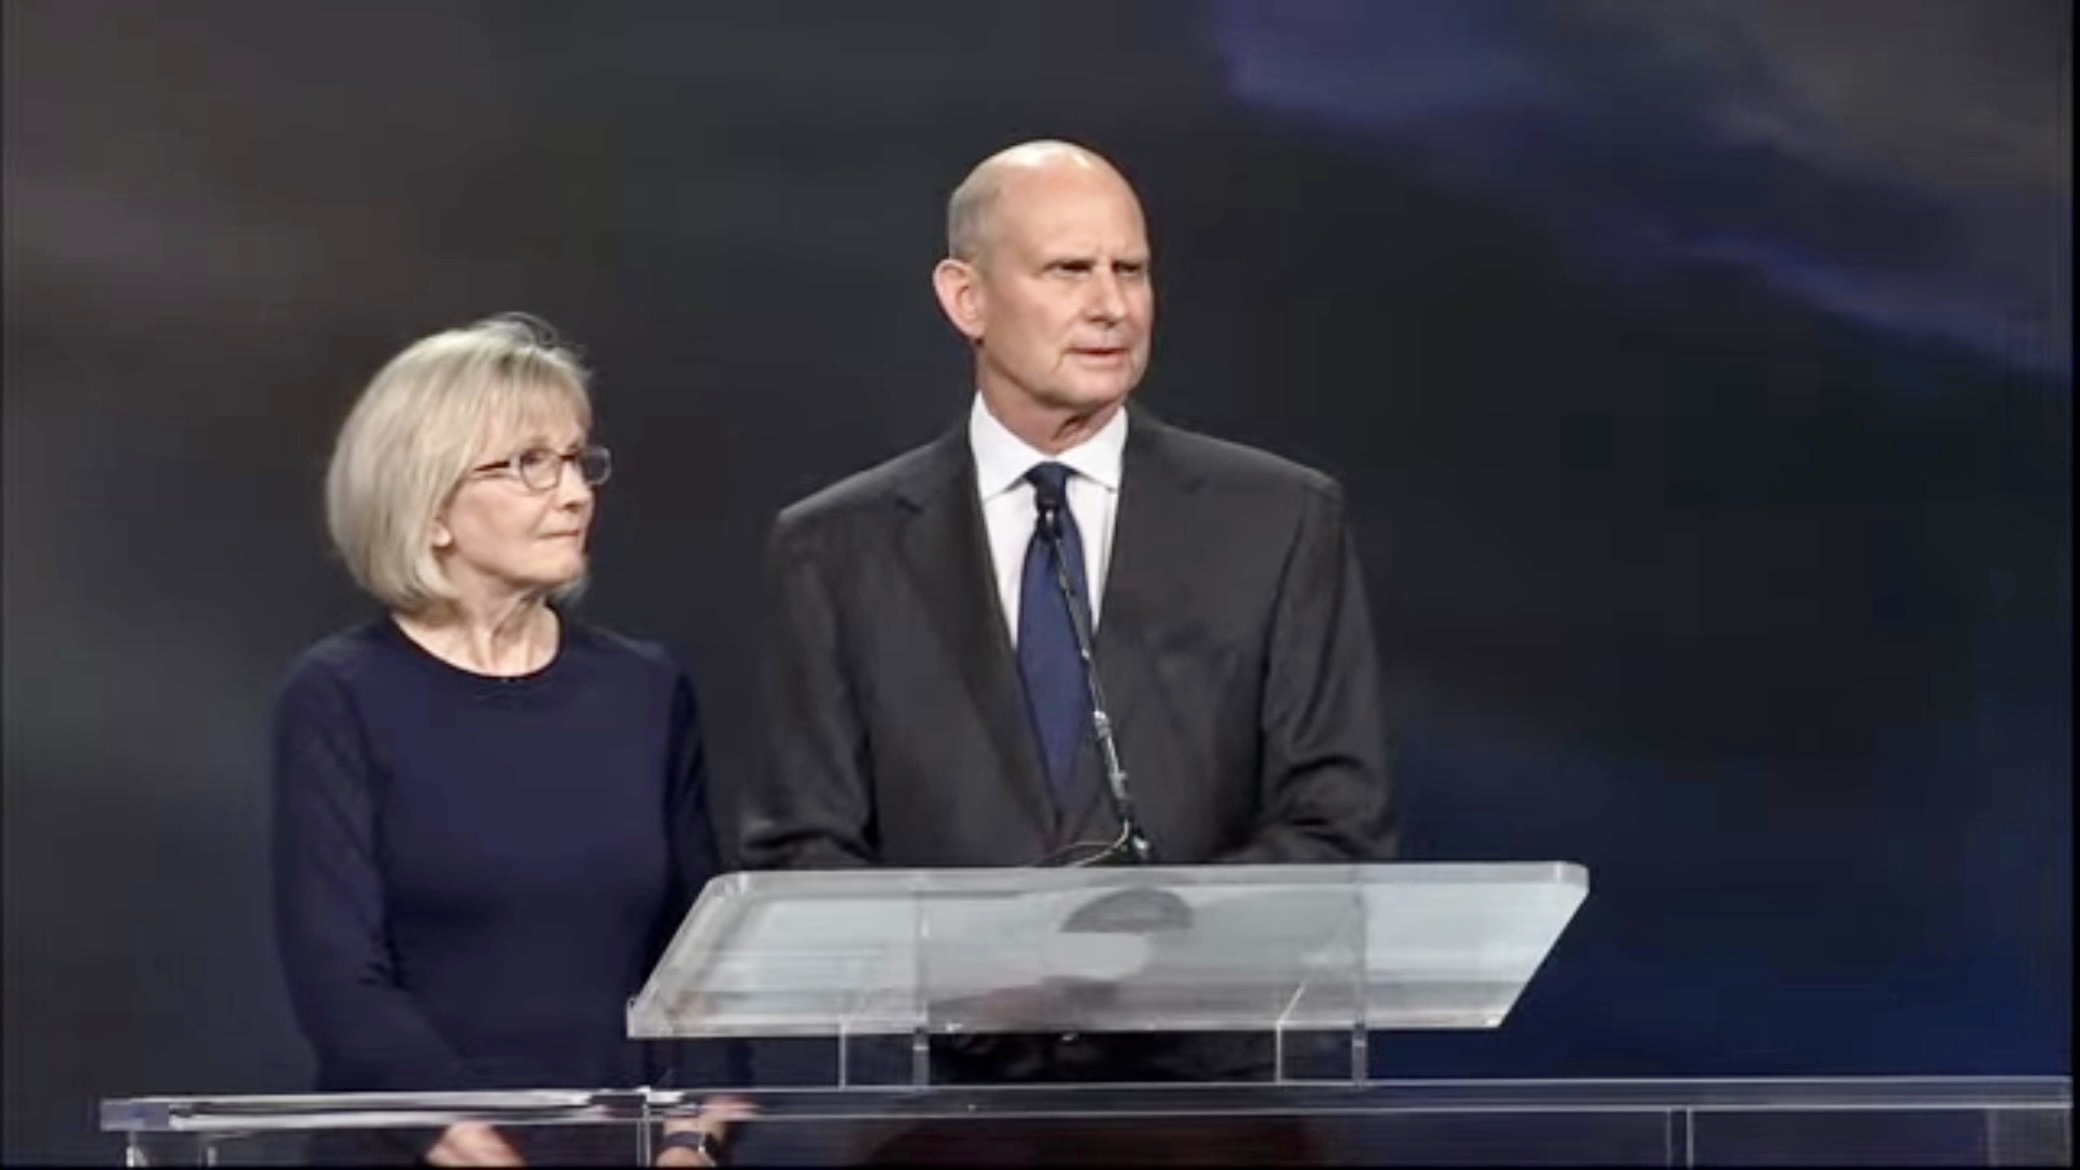 Ted N.C. Wilson Re-Elected as President of the General Conference of Seventh-day Adventists for Third Term.